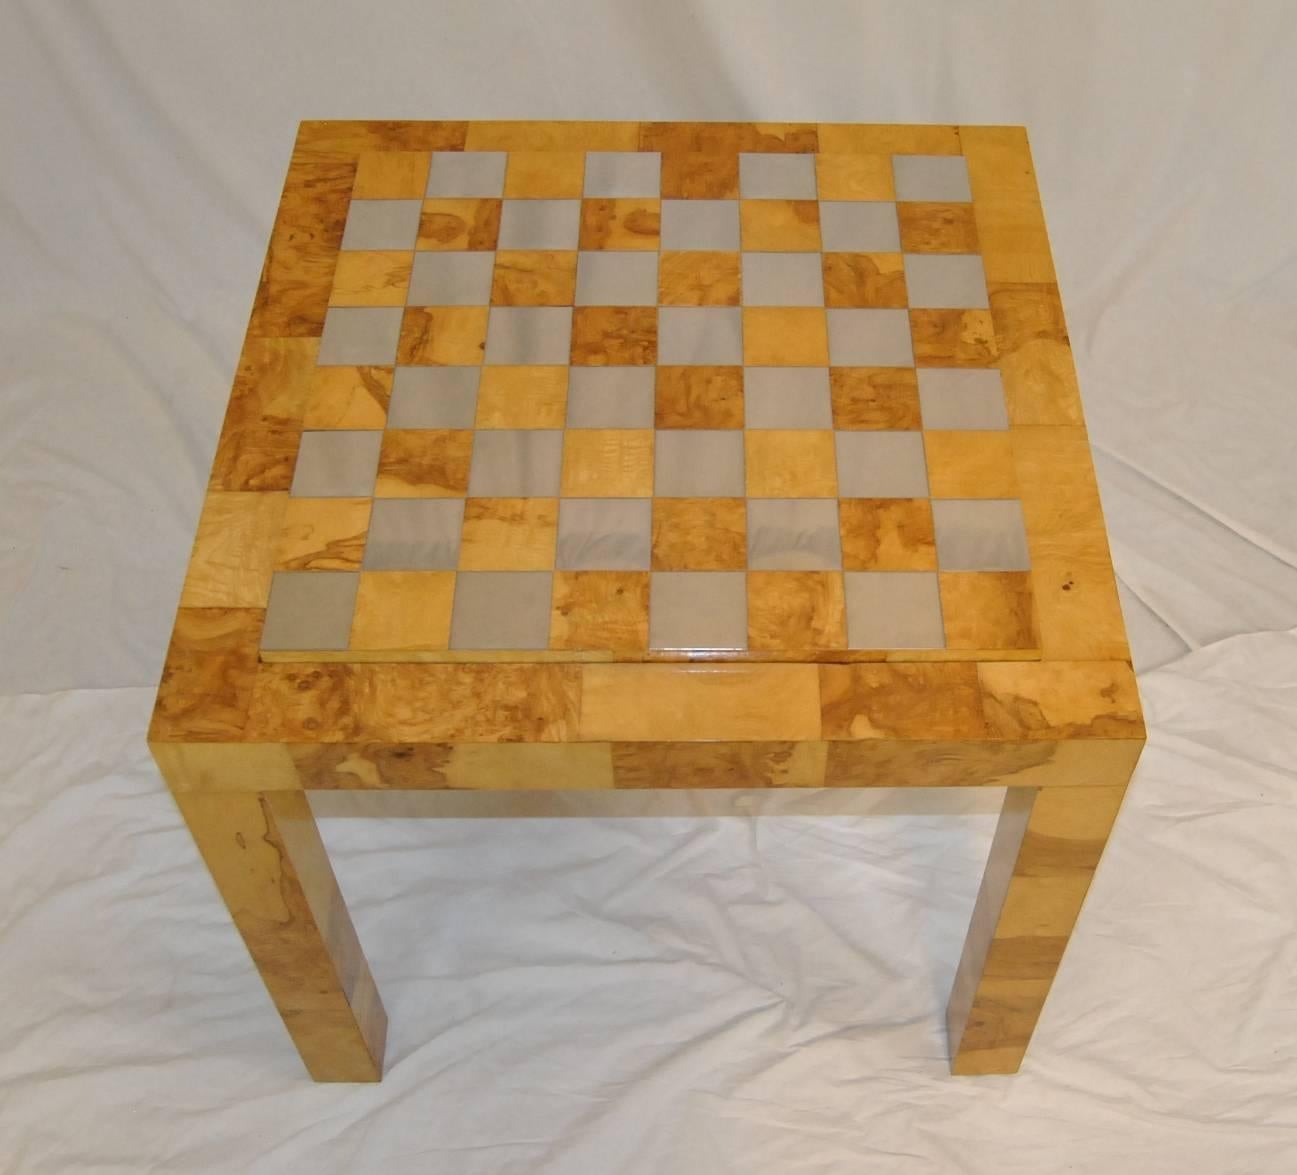 Beautiful game table by Paul Evans. The burl wood table has a top which reverses from a polished brass and burl board to a black laminate top. Spectacular lines on this table so typical of Paul Evans design.